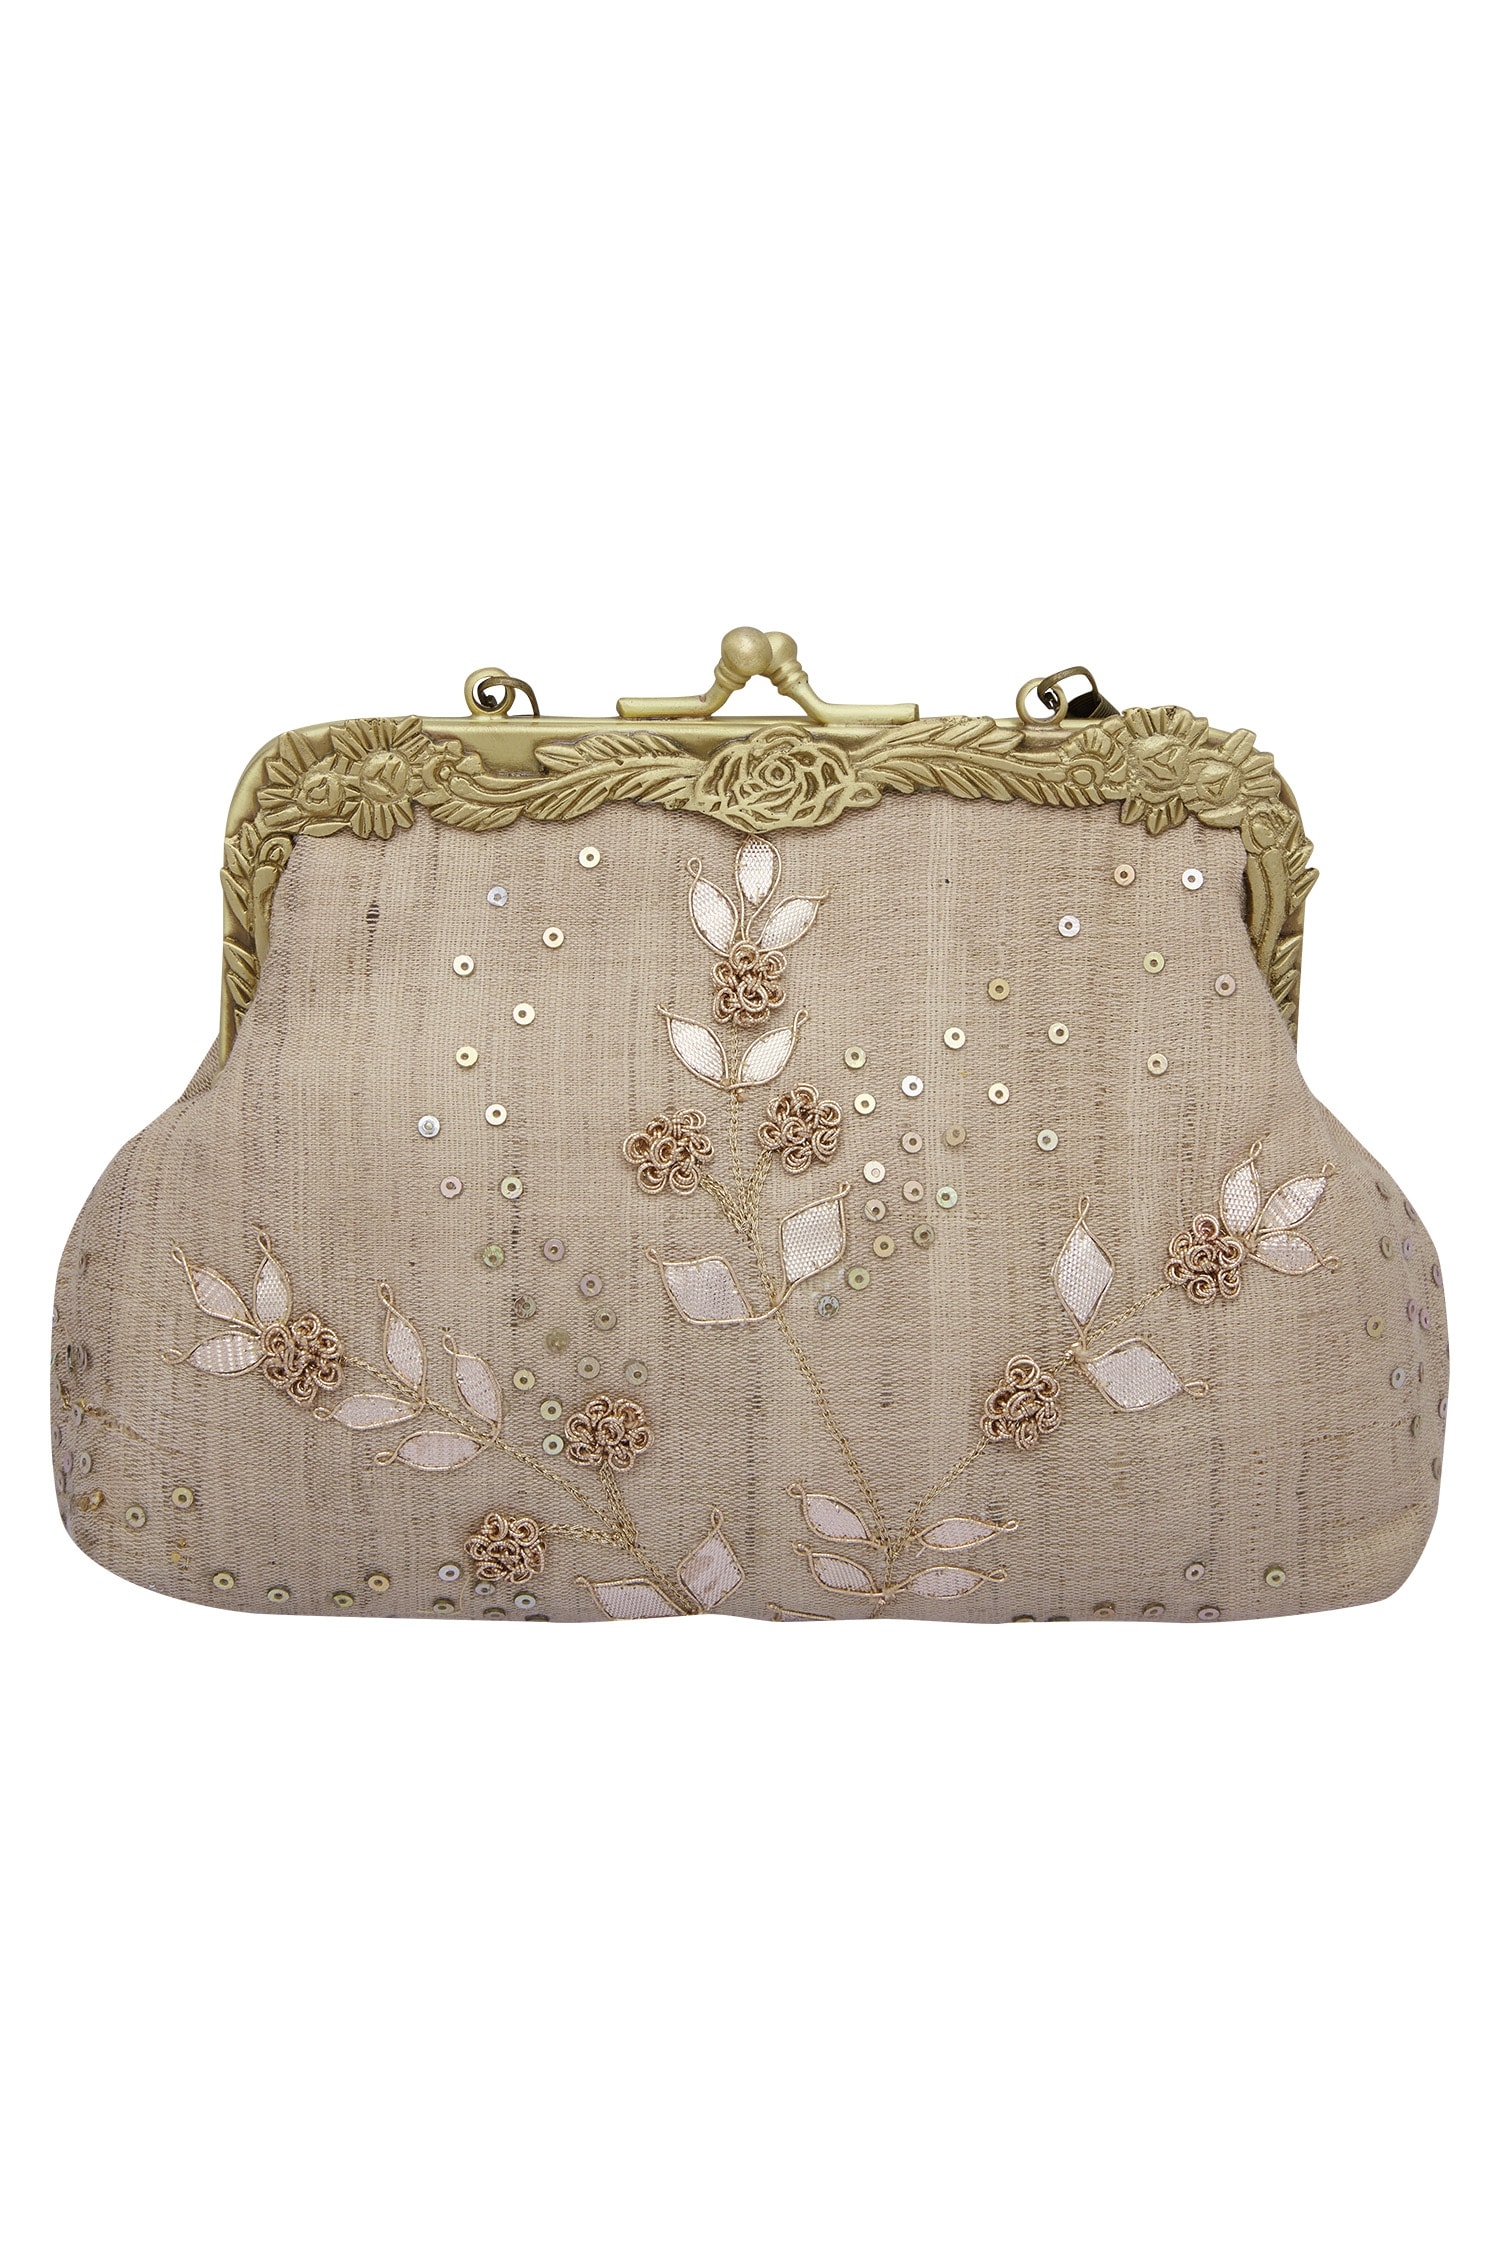 BABEYOND Evening Clutch Purses for Women - 1920s Accessories for Women  Gatsby Evening Bag Vintage Beaded Sequin Pearl Purse: Handbags: Amazon.com